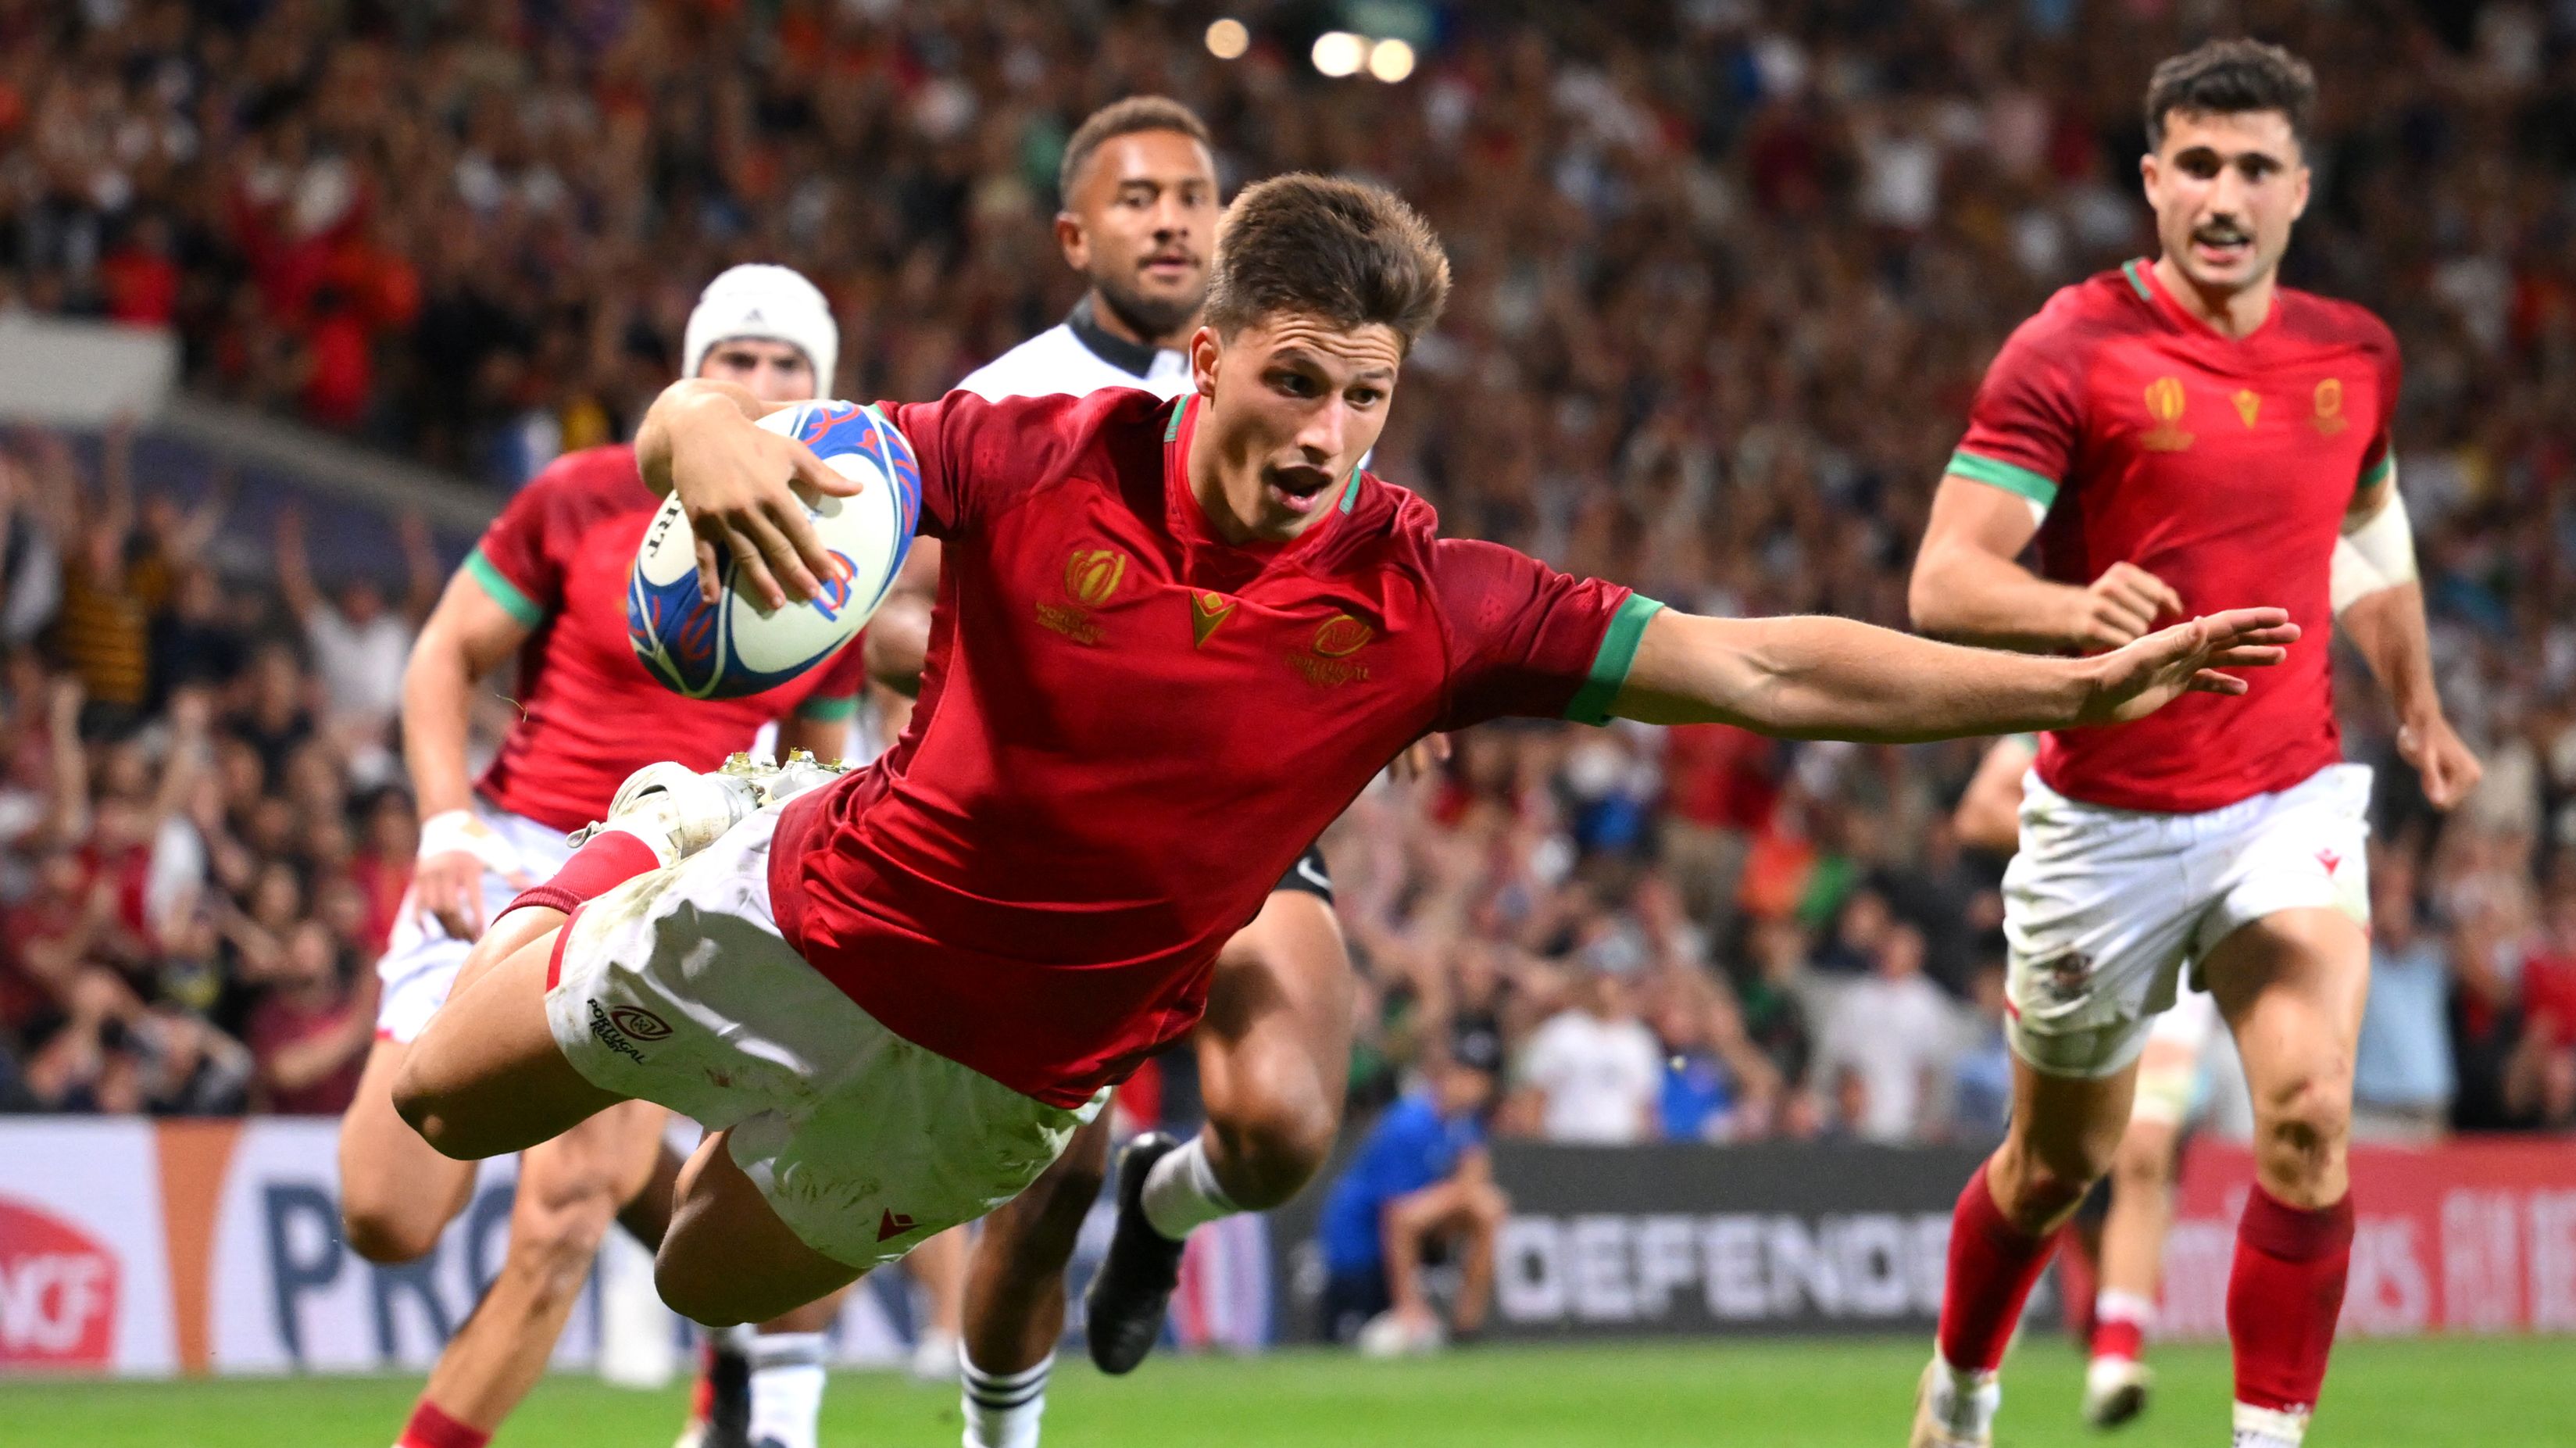 Rodrigo Marta scores the winning try for Portugal to seal a famous victory over Fiji.